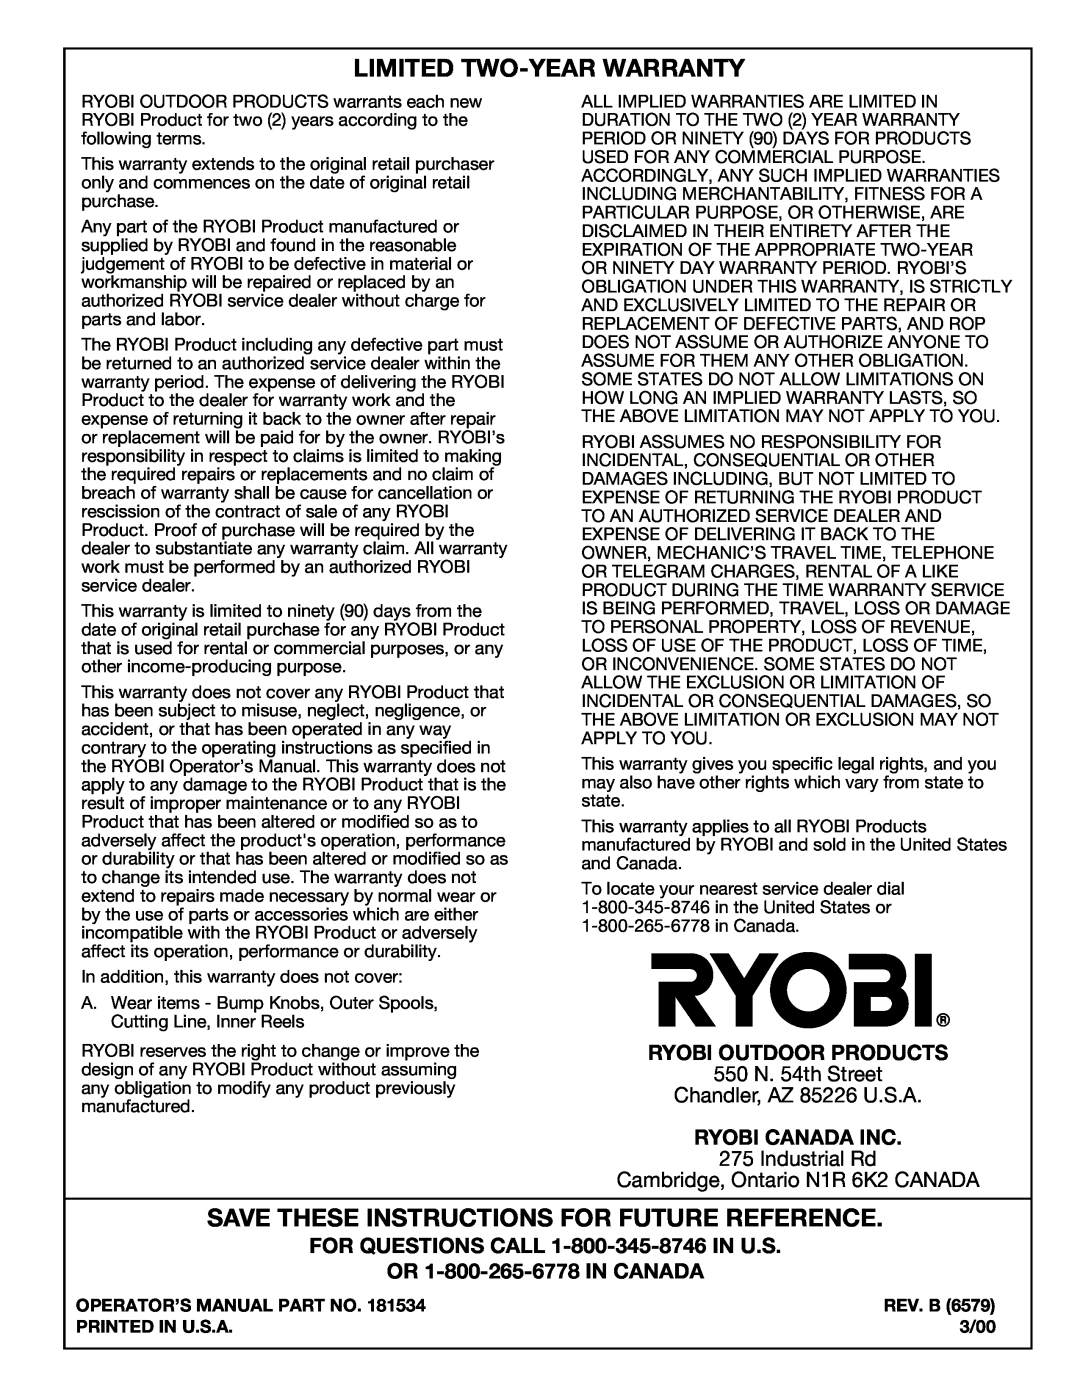 Ryobi SS725r Limited Two-Year Warranty, Save These Instructions For Future Reference, Ryobi Outdoor Products, Rev. B, 3/00 